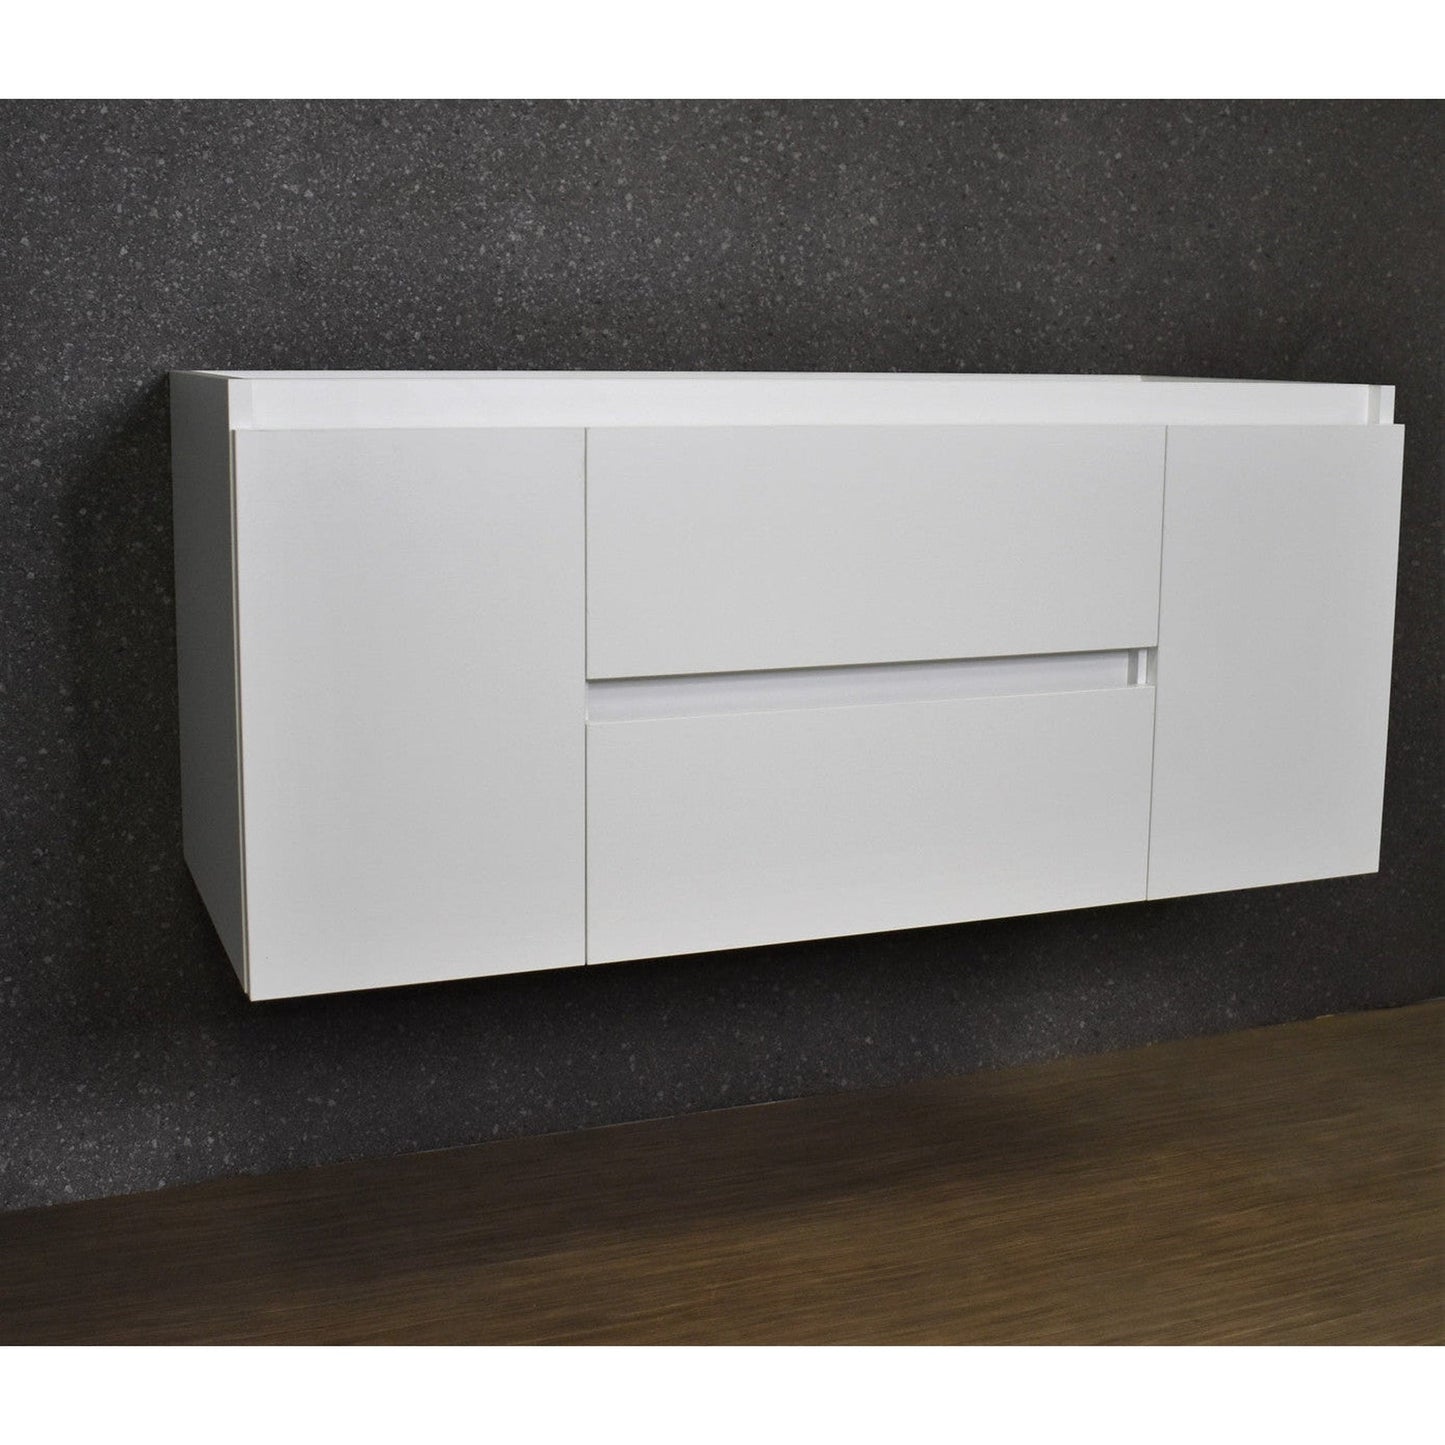 Volpa USA Salt 48" x 18" Glossy White Wall-Mounted Floating Bathroom Vanity Cabinet with Drawers